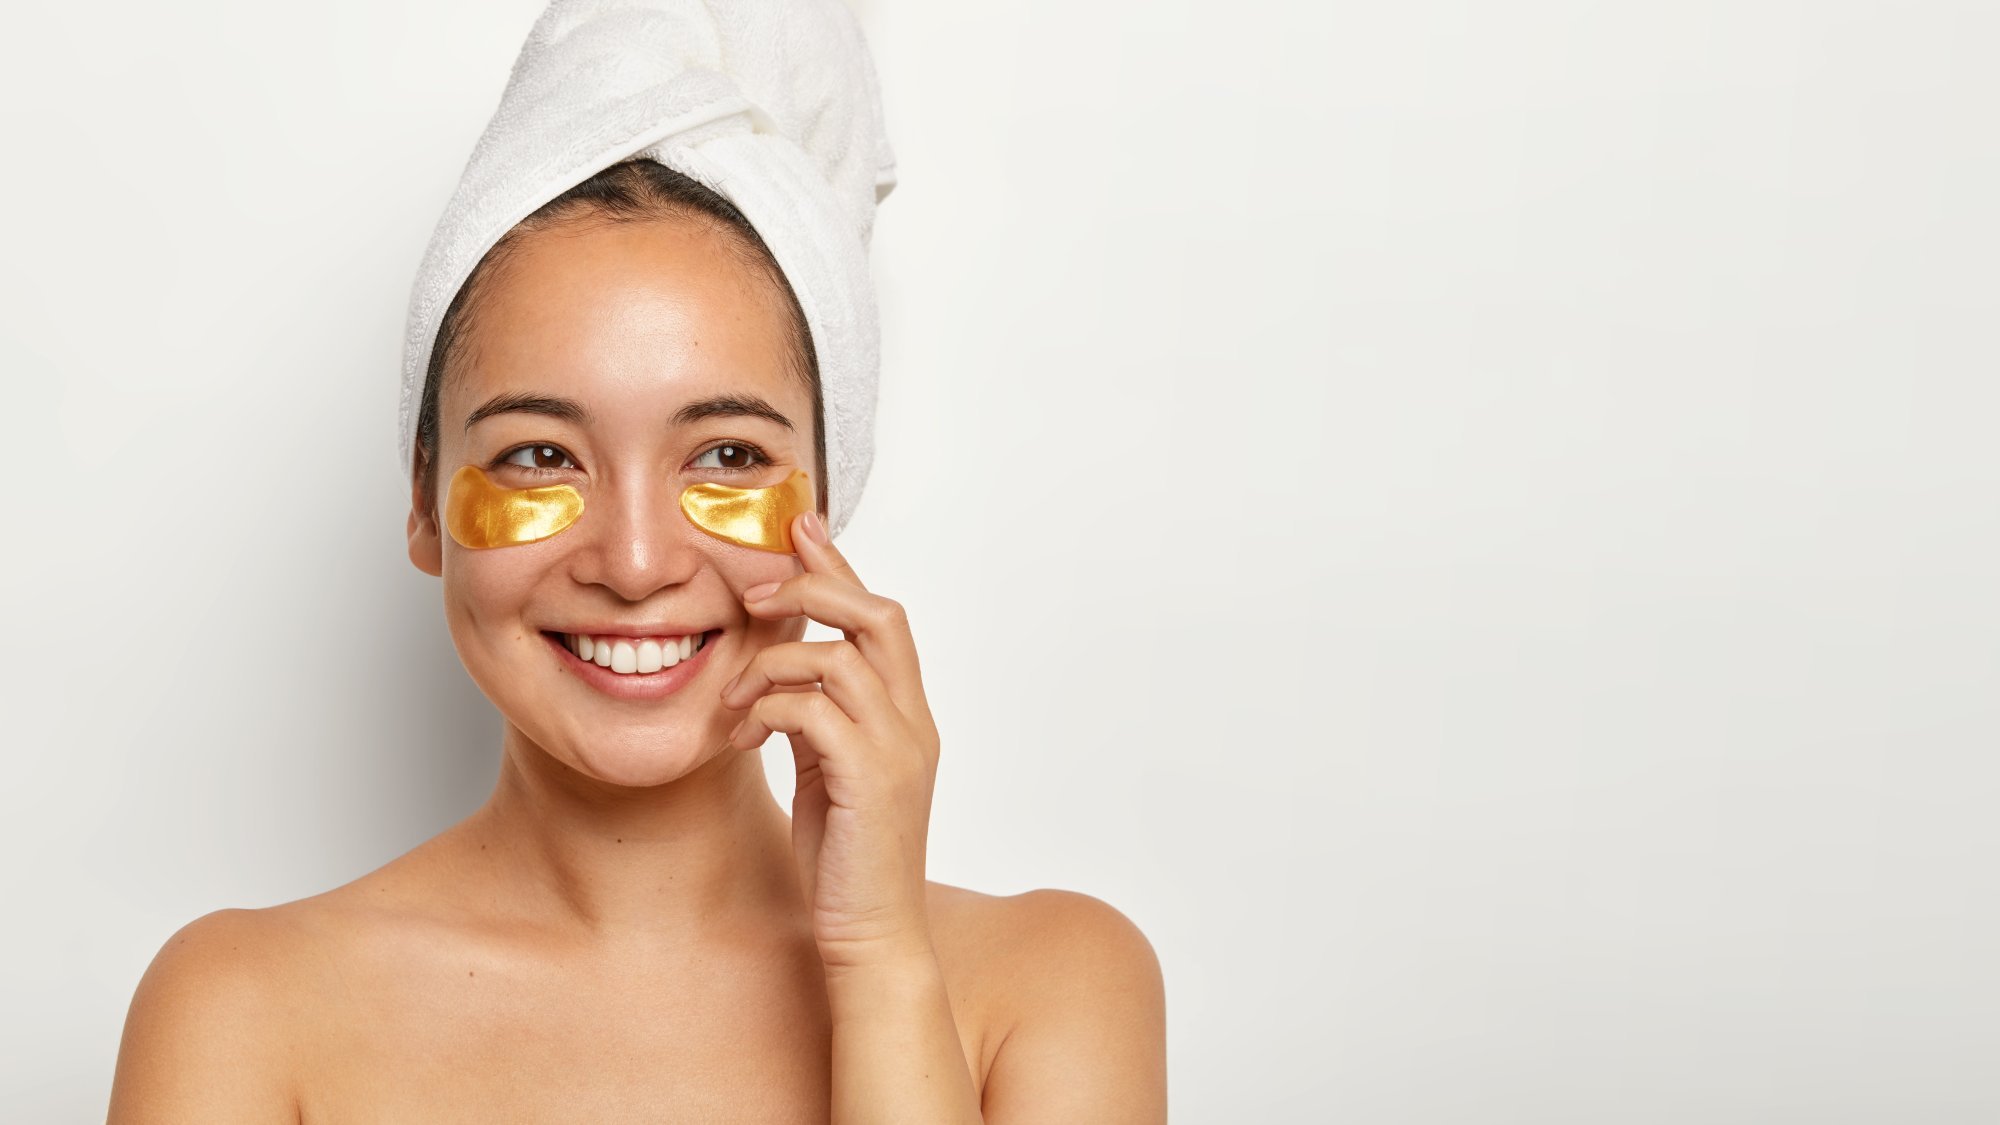 beautiful-charming-woman-with-healthy-skin-applies-cosmetic-patches-eyes-looks-gladfully-aside-thinks-about-something-pleasant-wears-wrapped-towel-head-has-spa-procedures-home.jpg